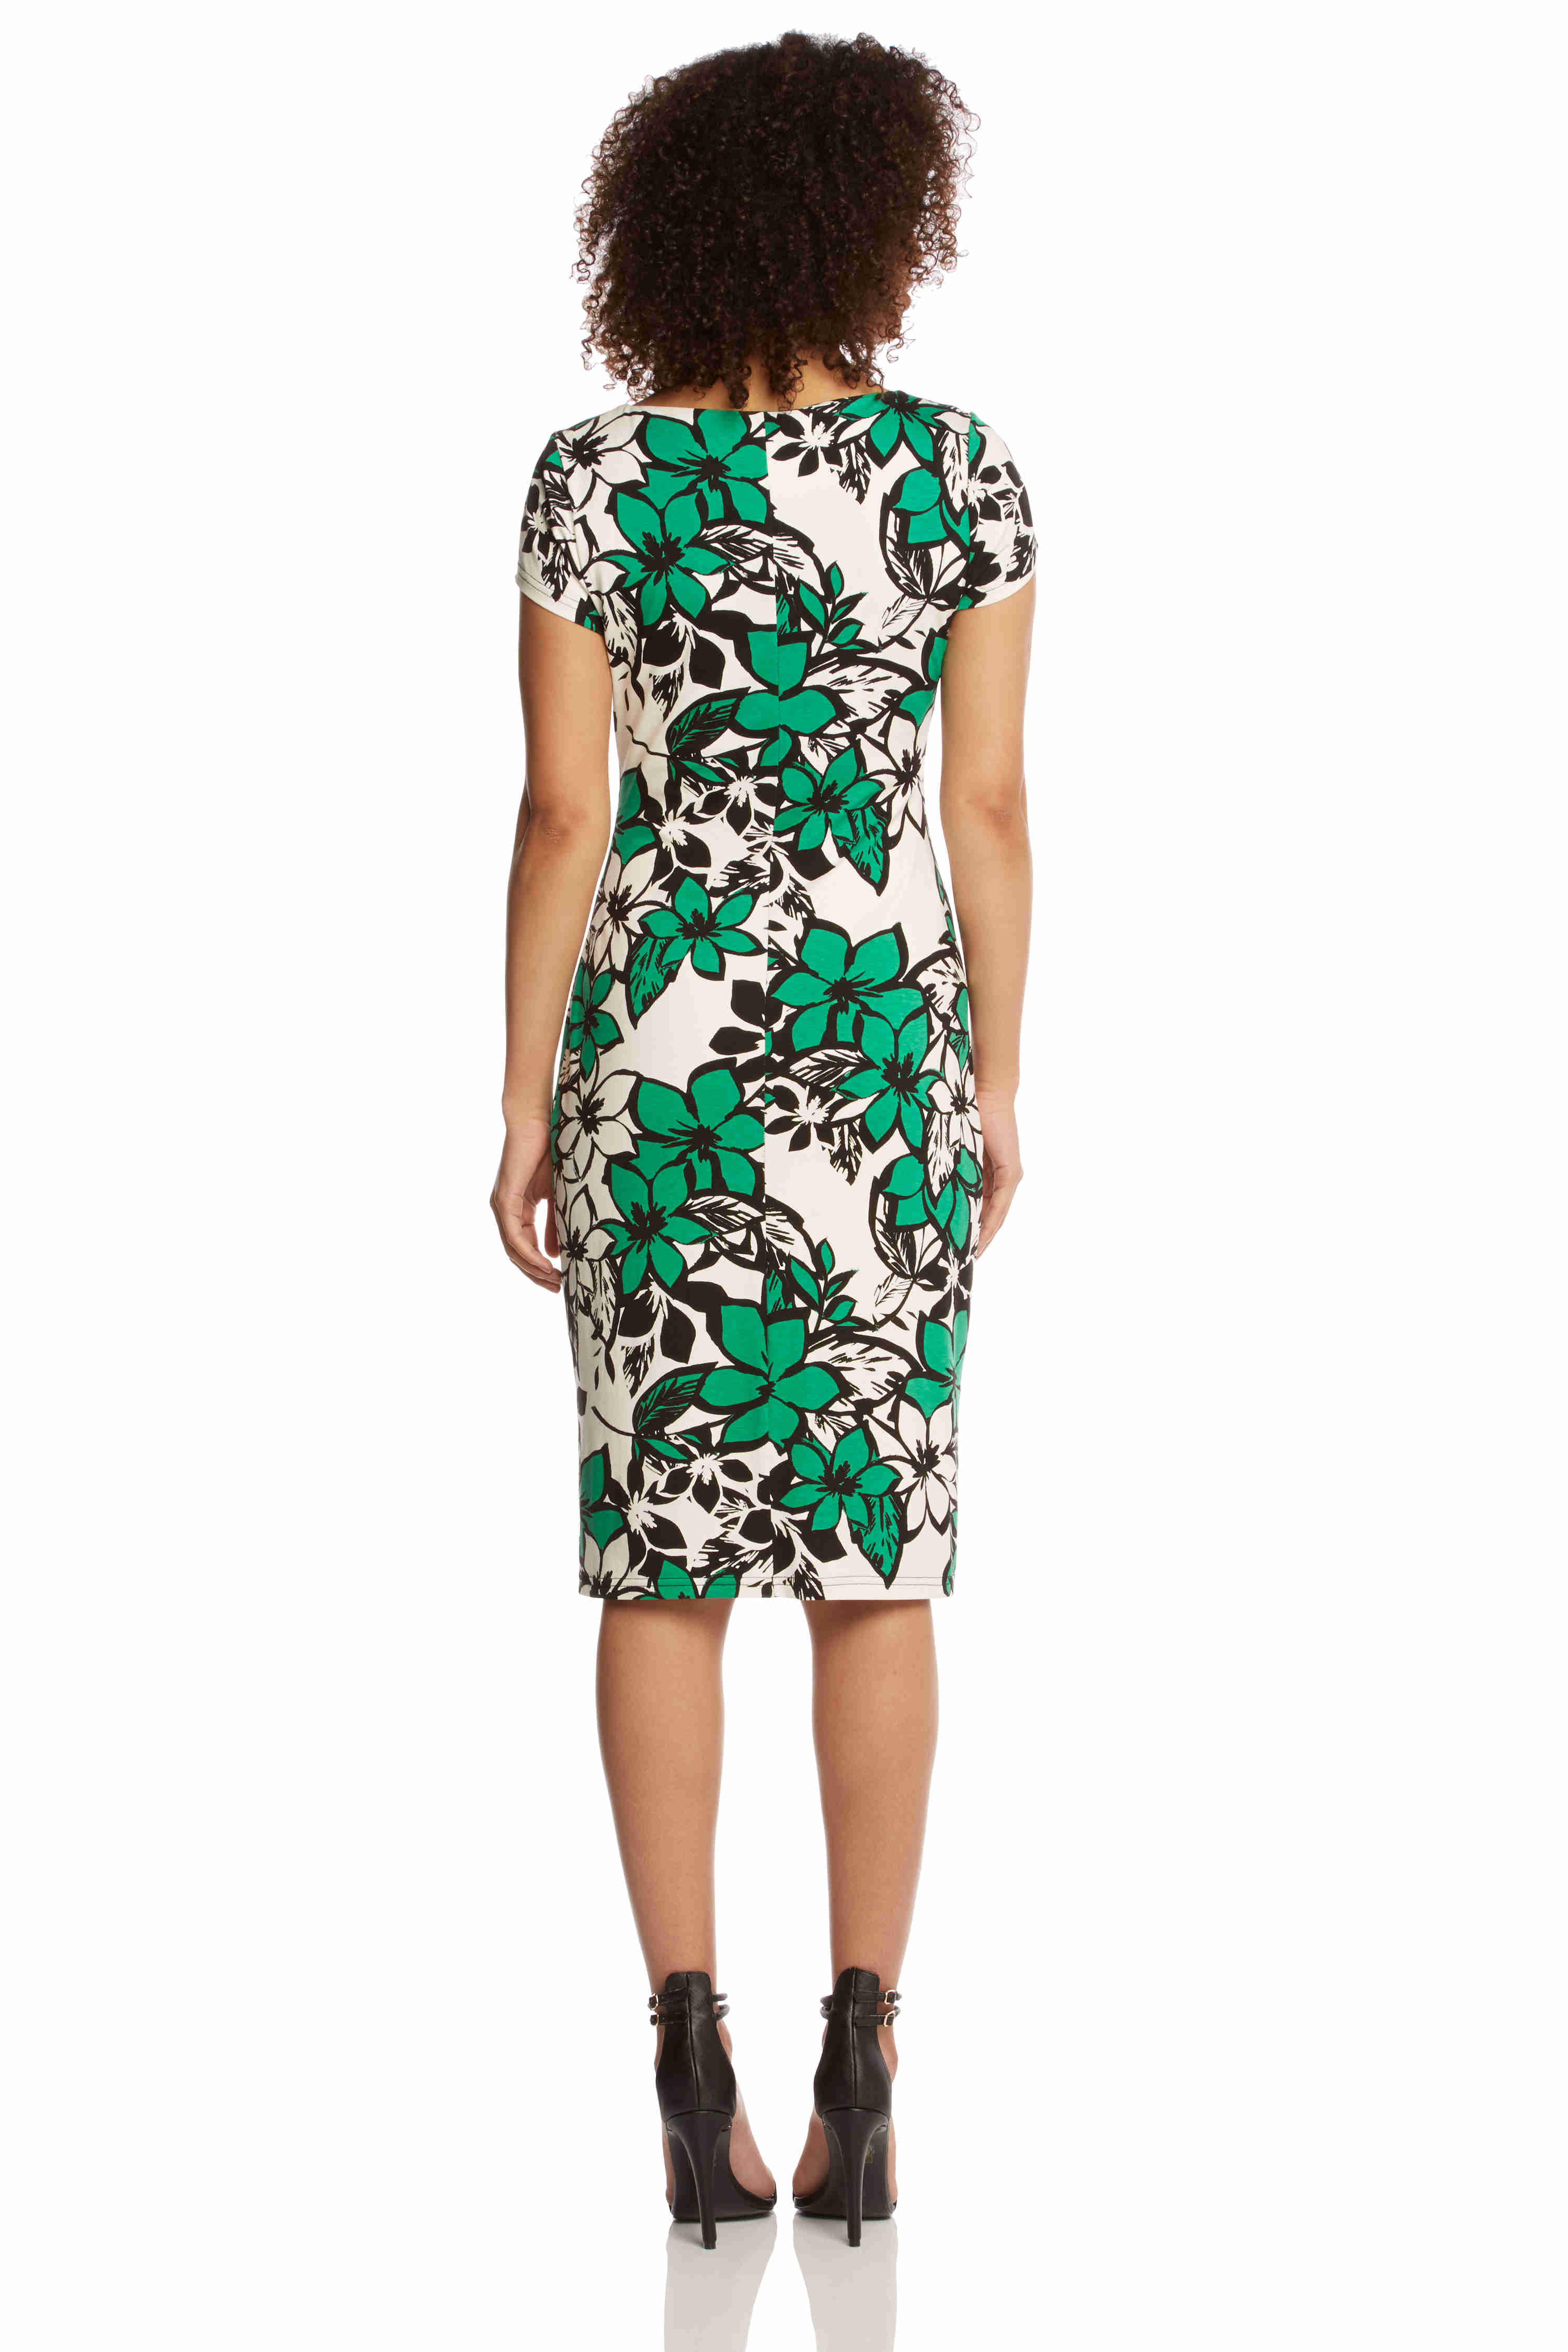 Jade Graphic Floral Print Jersey Dress , Image 5 of 5